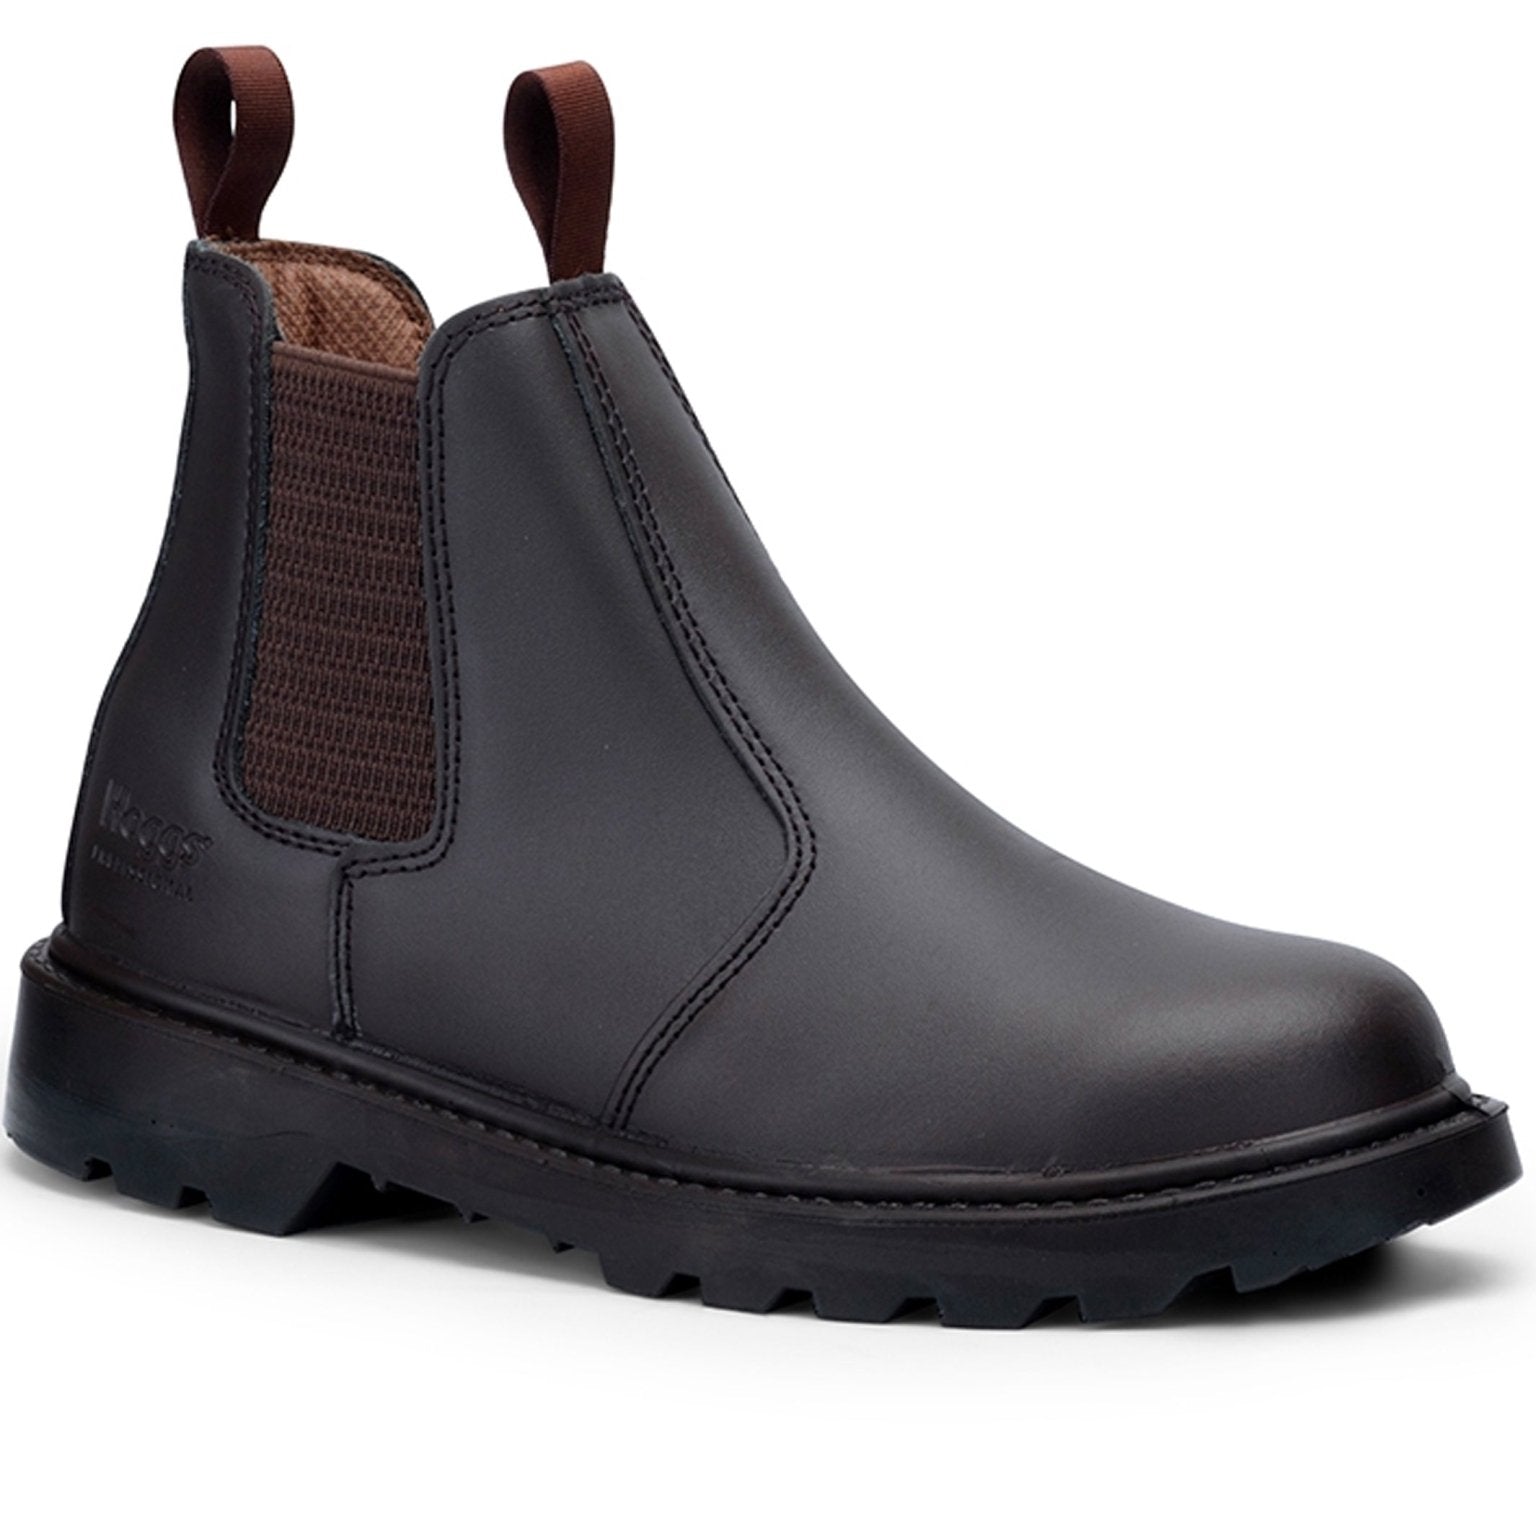 Hoggs of Fife Hoggs of Fife - Safety Steel Toe Dealer Boot / Safety Chelsea boot Steel Toe boots Classic D2 / D3 Safety Footwear